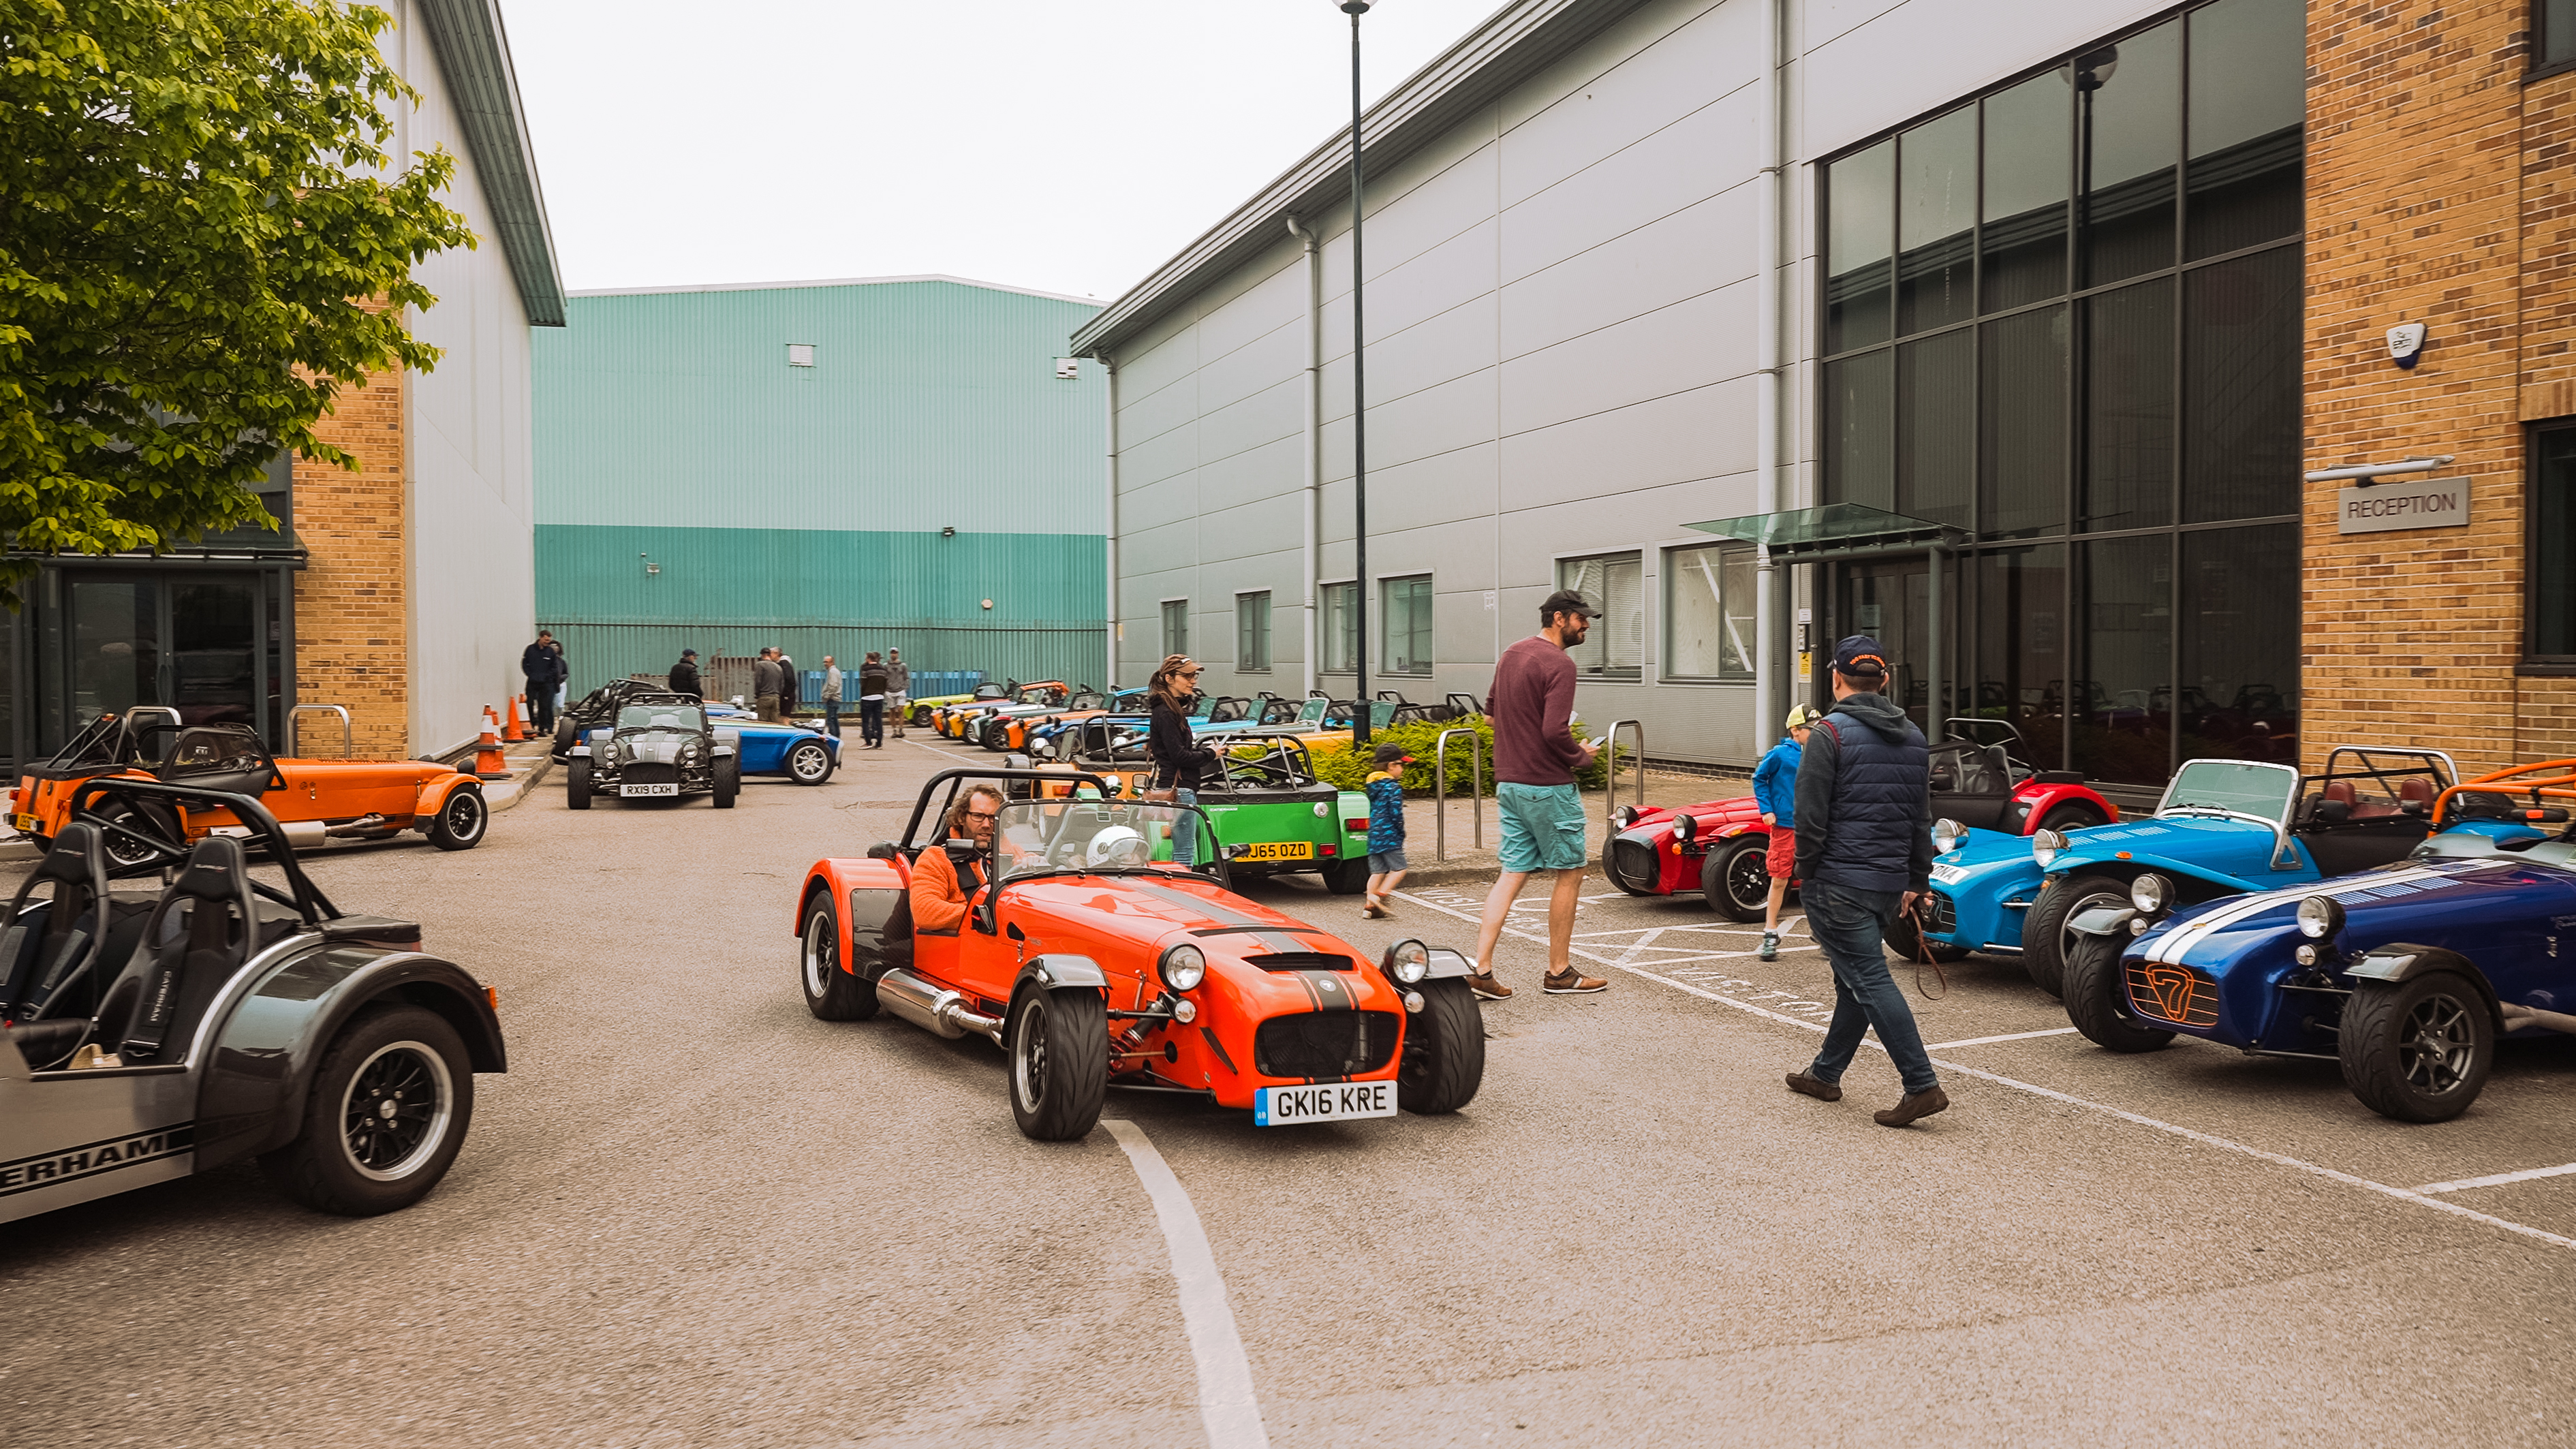 Caterham Cars Annual Open Day is back!